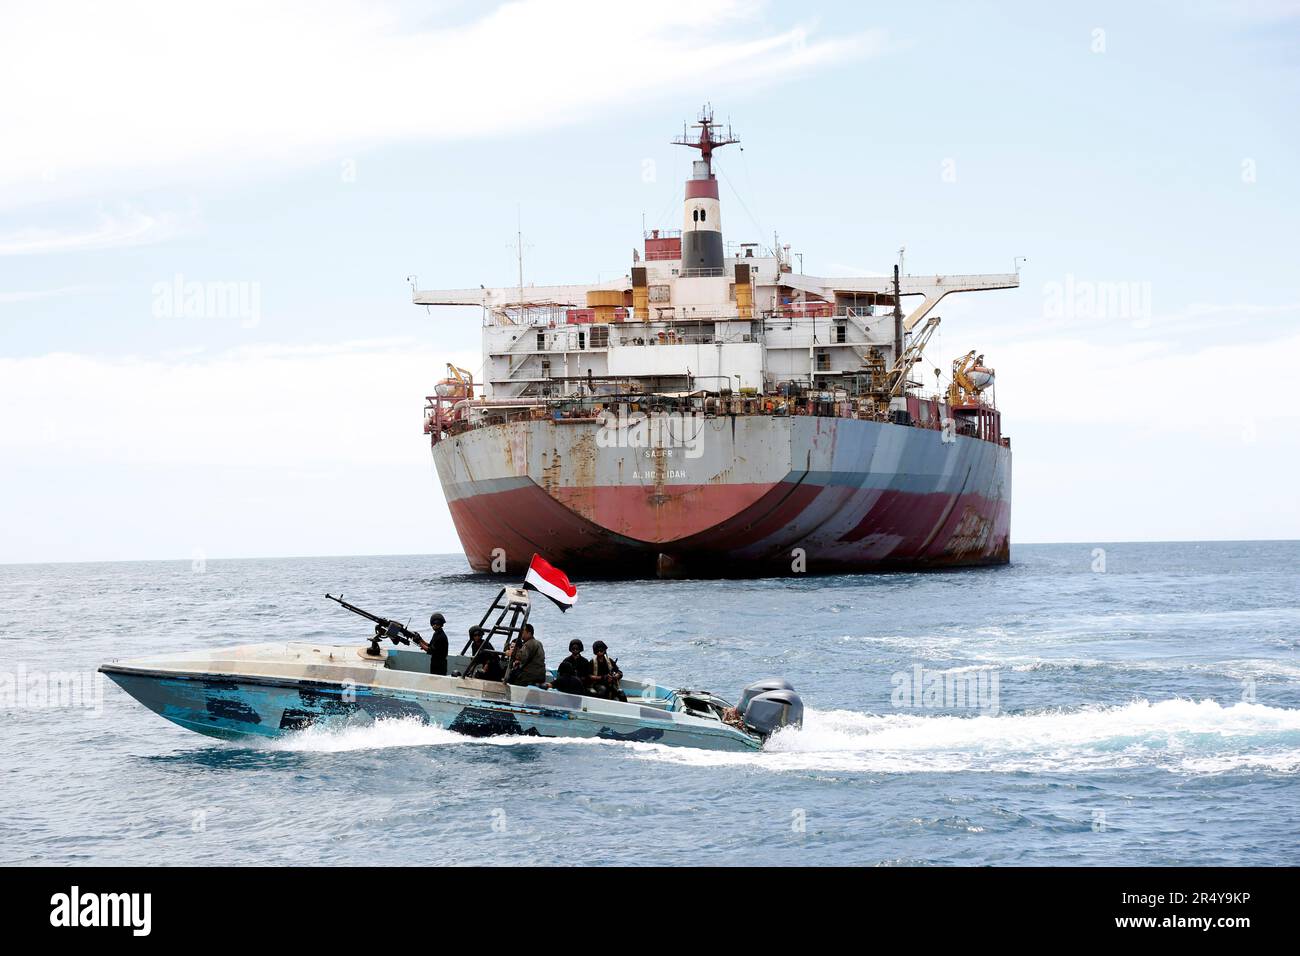 Hodeidah, Yemen. 30th May, 2023. A Yemen's coast guard boat sails past the FSO Safer vessel at Ras Issa port in Hodeidah province, Yemen, on May 30, 2023. A United Nations (UN) ship arrived on Tuesday at the site of the floating storage and offloading (FSO) Safer vessel, a decaying super oil tanker, off the coast of Ras Issa, Hodeidah in western Yemen. Credit: Mohammed Mohammed/Xinhua/Alamy Live News Stock Photo